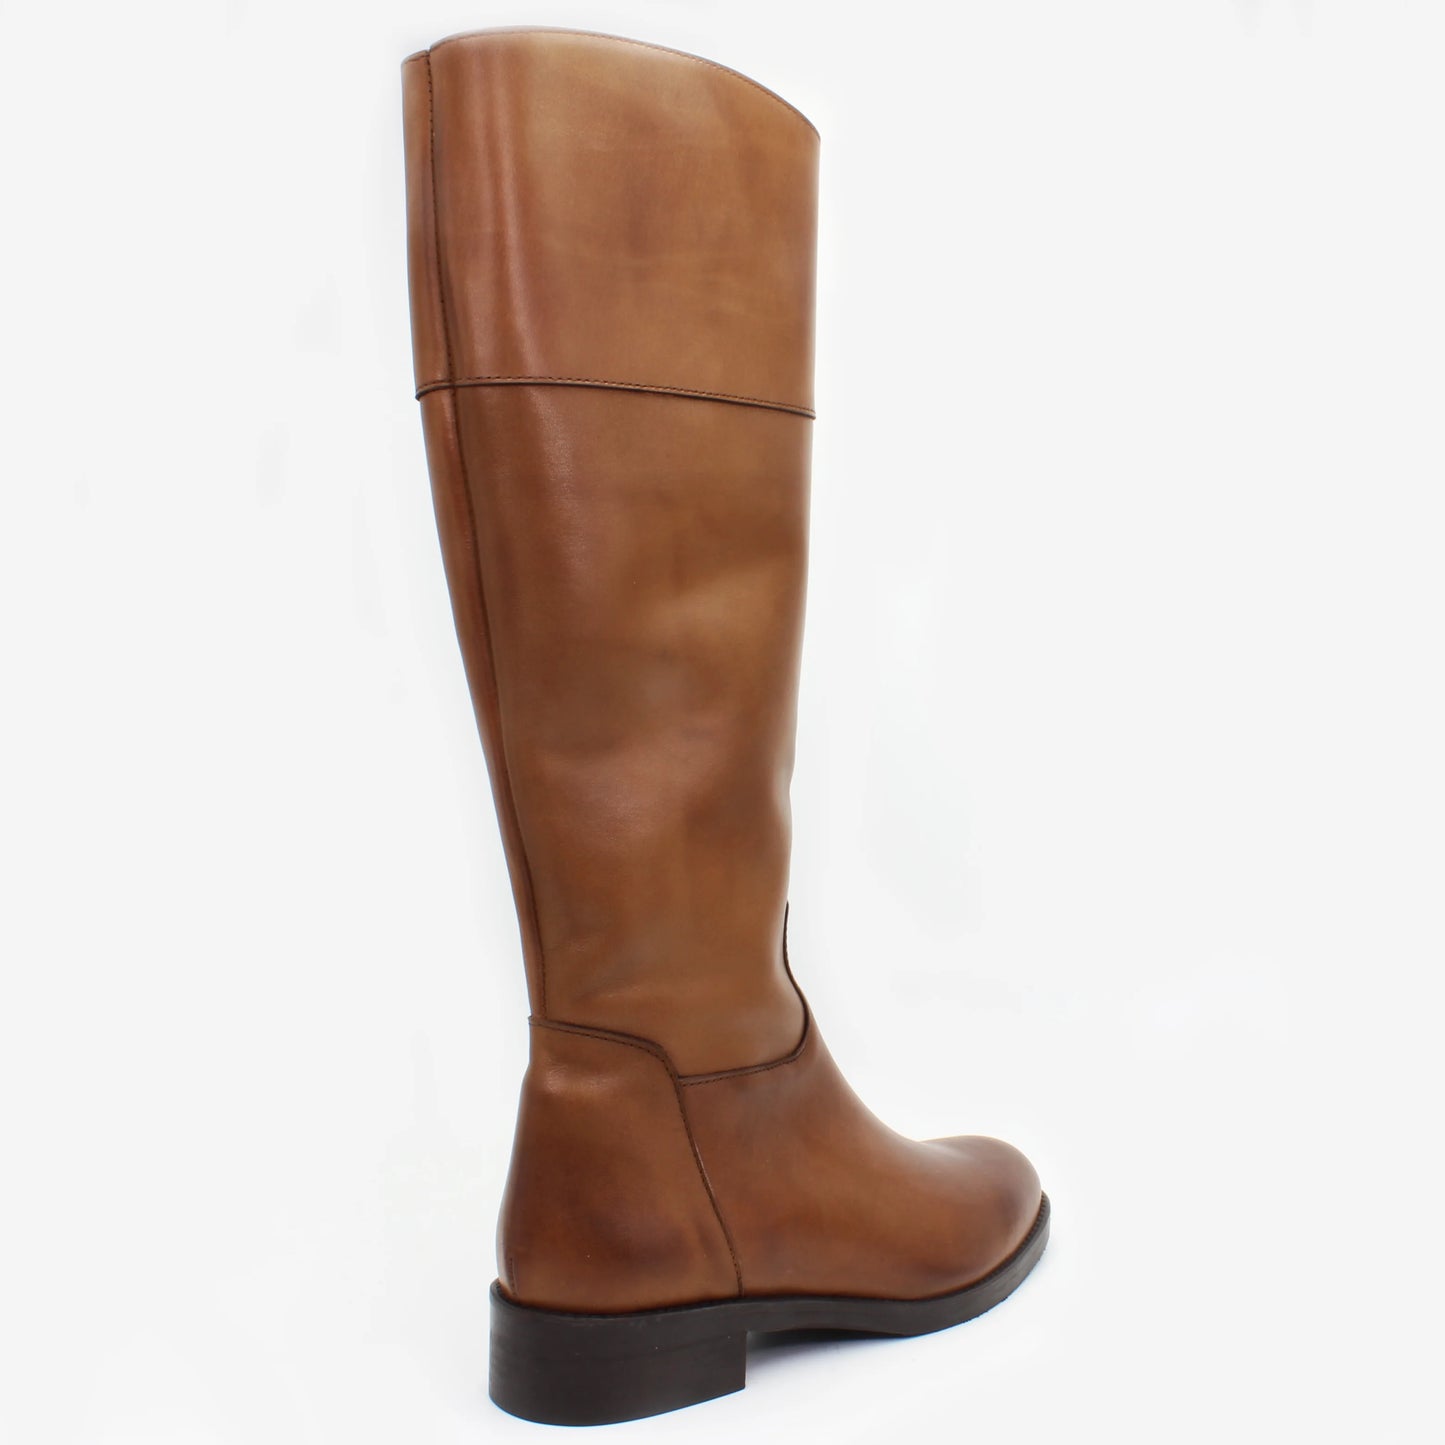 Shop Handmade Italian Leather Equestrian Boot in Tabacco (GC5904) or browse our range of hand-made Italian boots for women in leather or suede in-store at Aliverti  Cape Town, or shop online. We deliver in South Africa & offer multiple payment plans as well as accept multiple safe & secure payment methods.